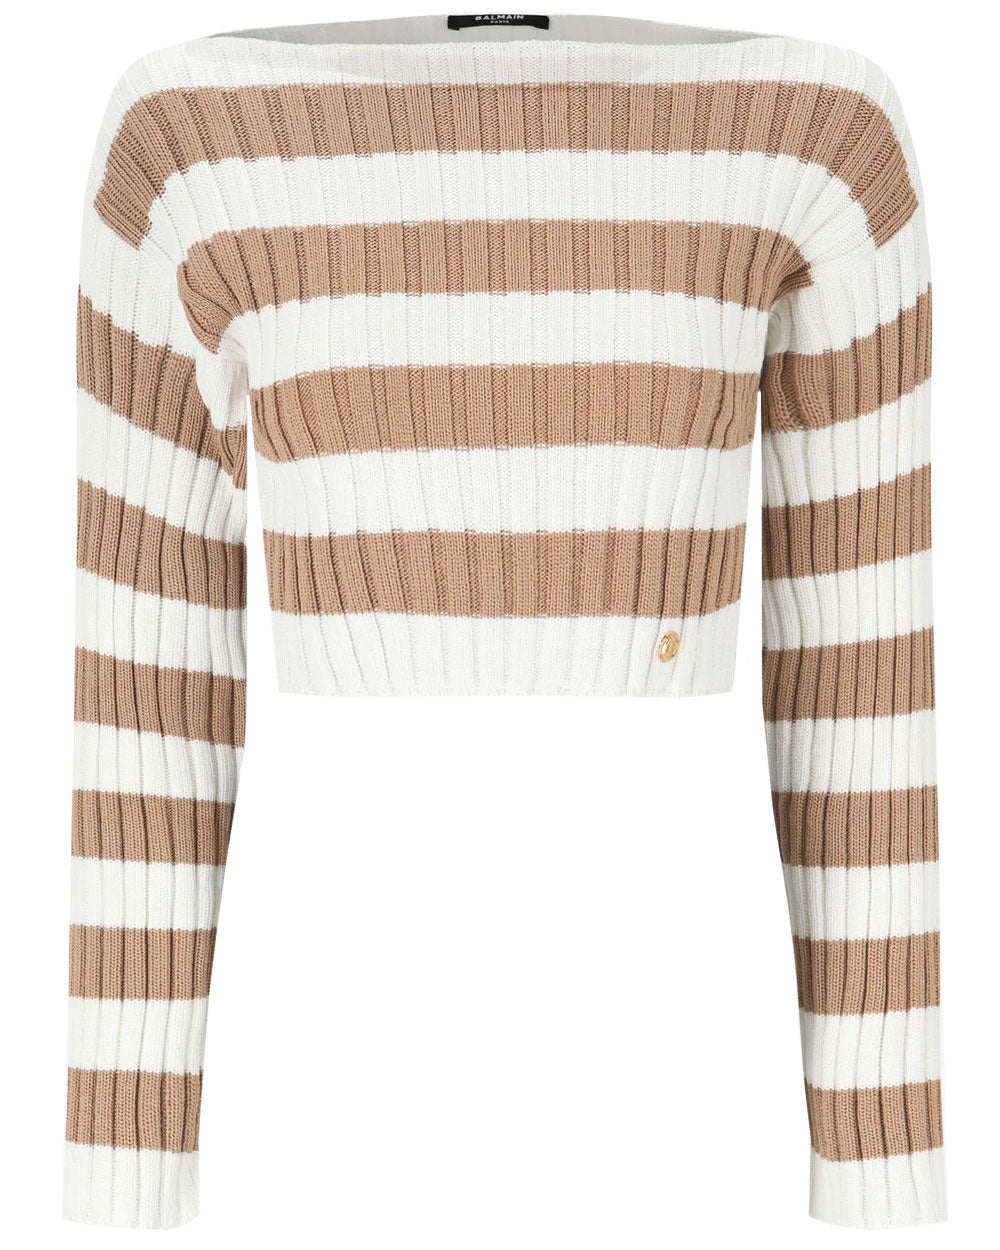 Sable and Blanc Stripe Cropped Knit Sweater